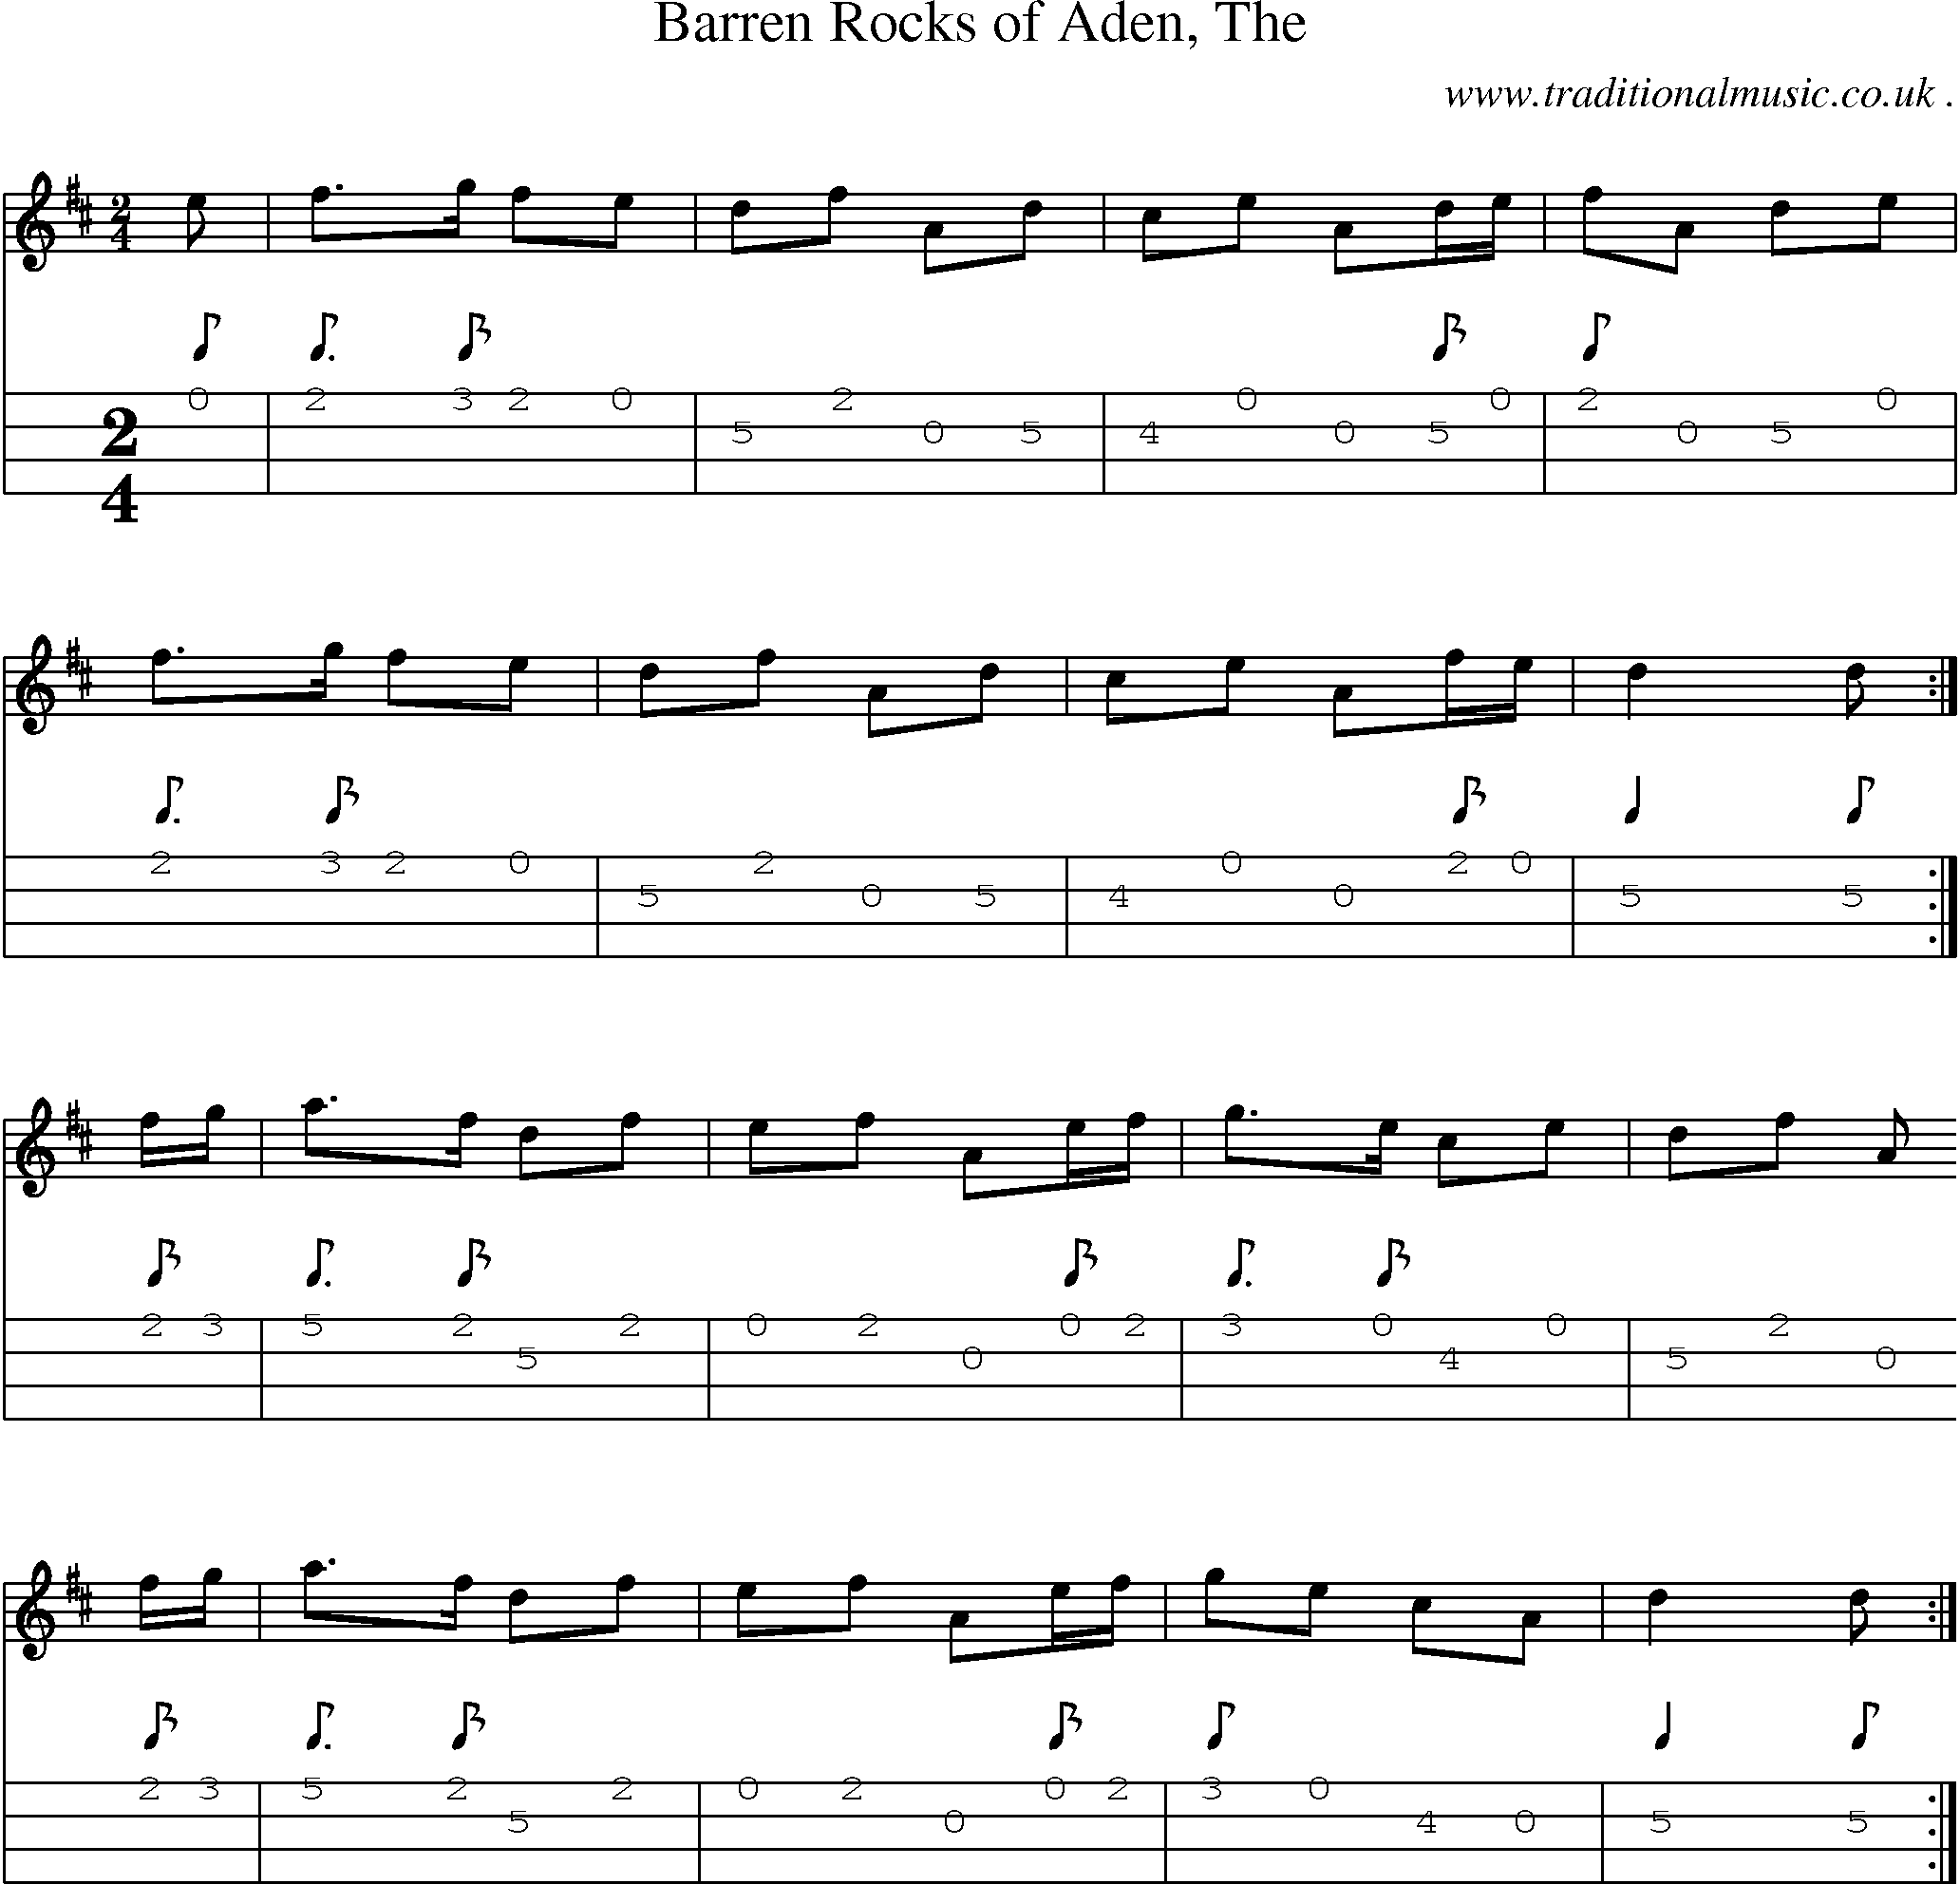 Sheet-music  score, Chords and Mandolin Tabs for Barren Rocks Of Aden The